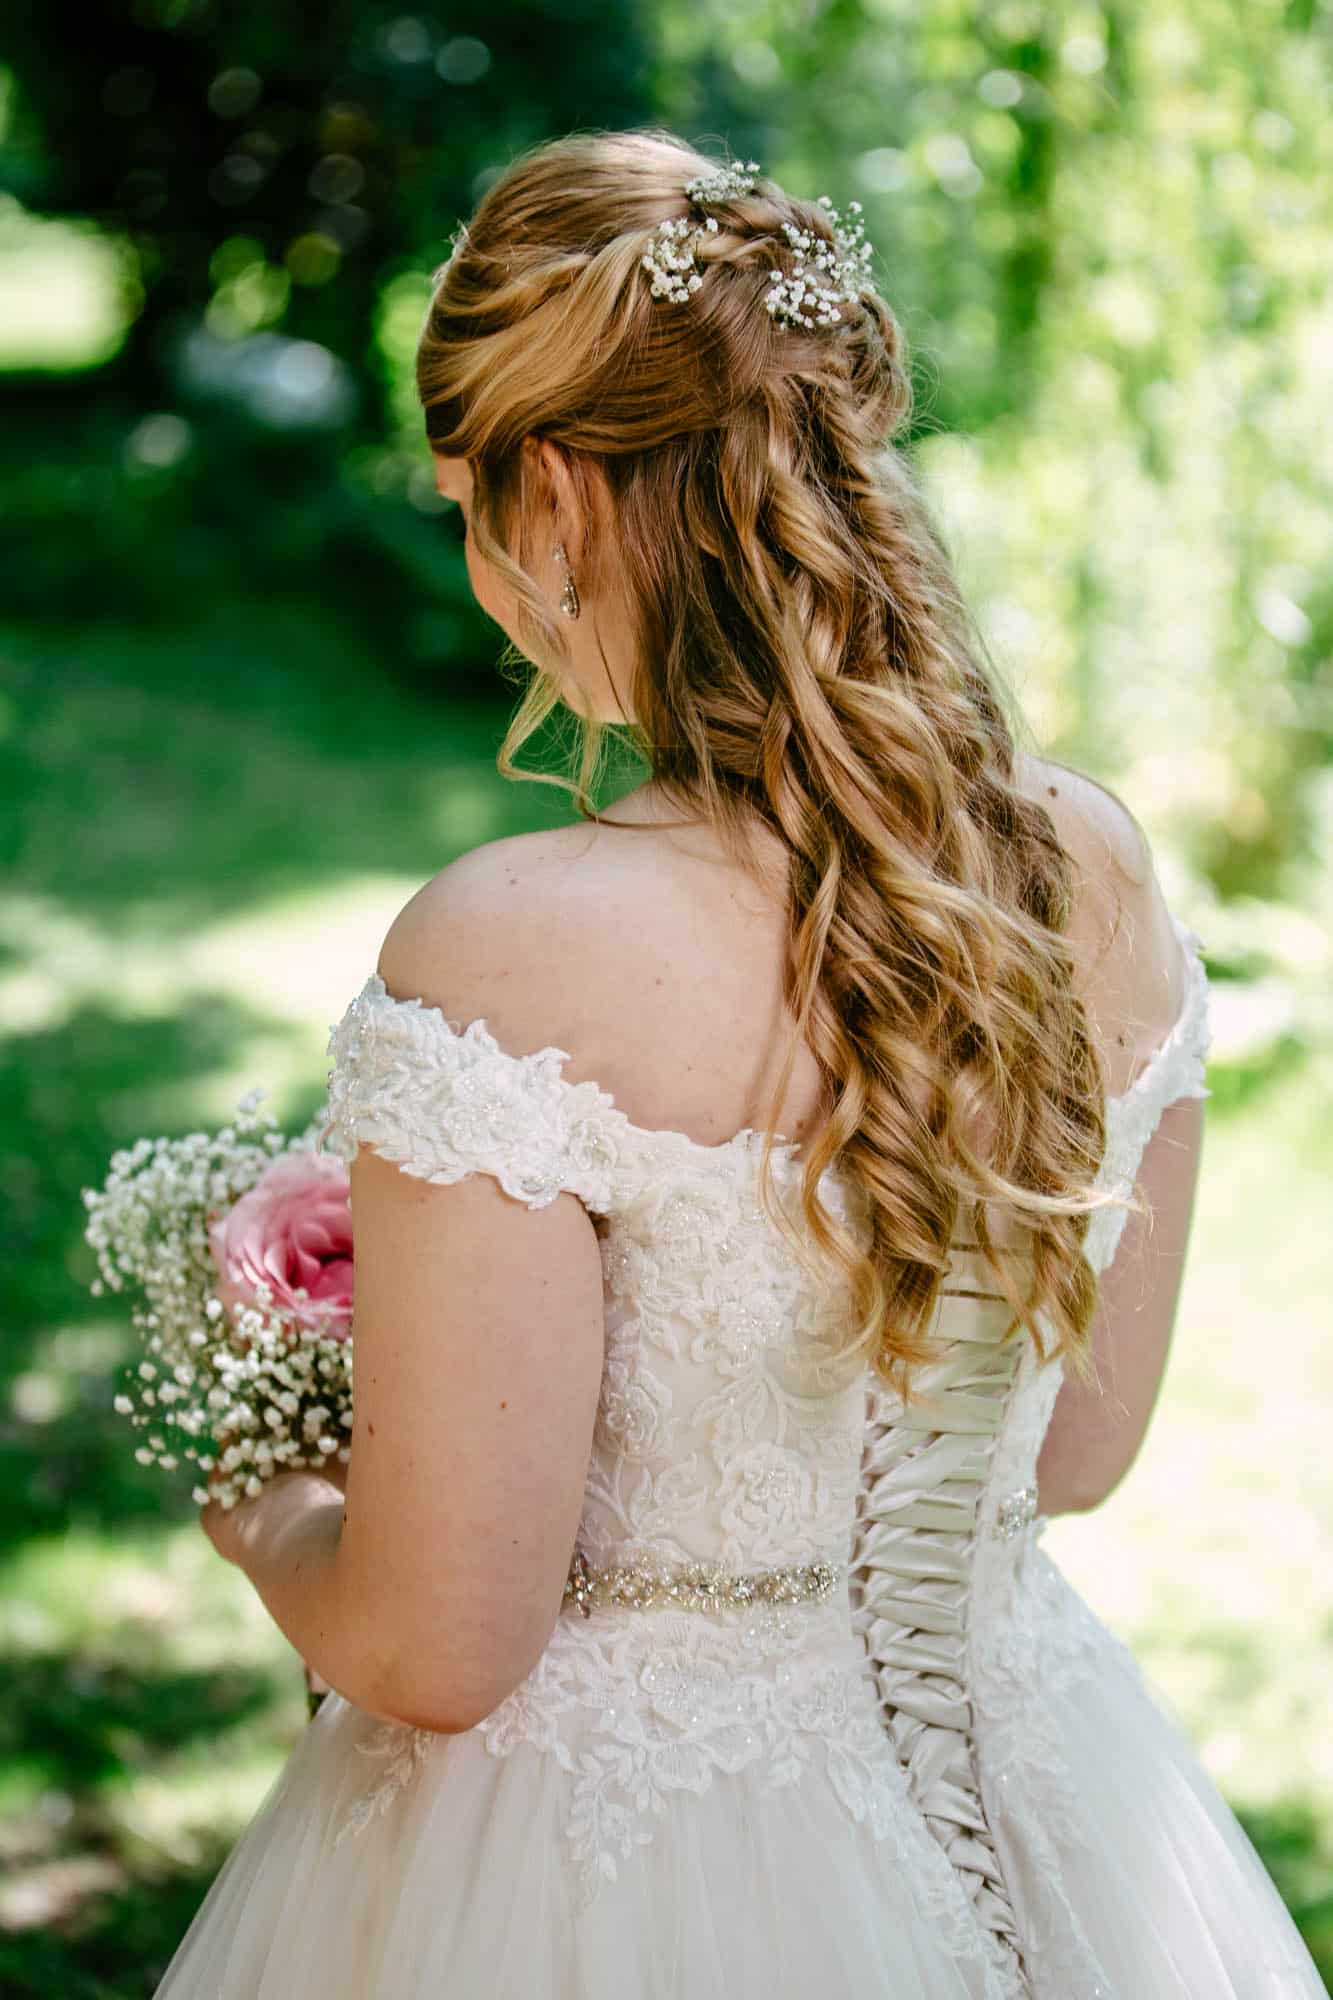 A bride with bridal hairstyles in a beautiful wedding dress and flowers in her hair.